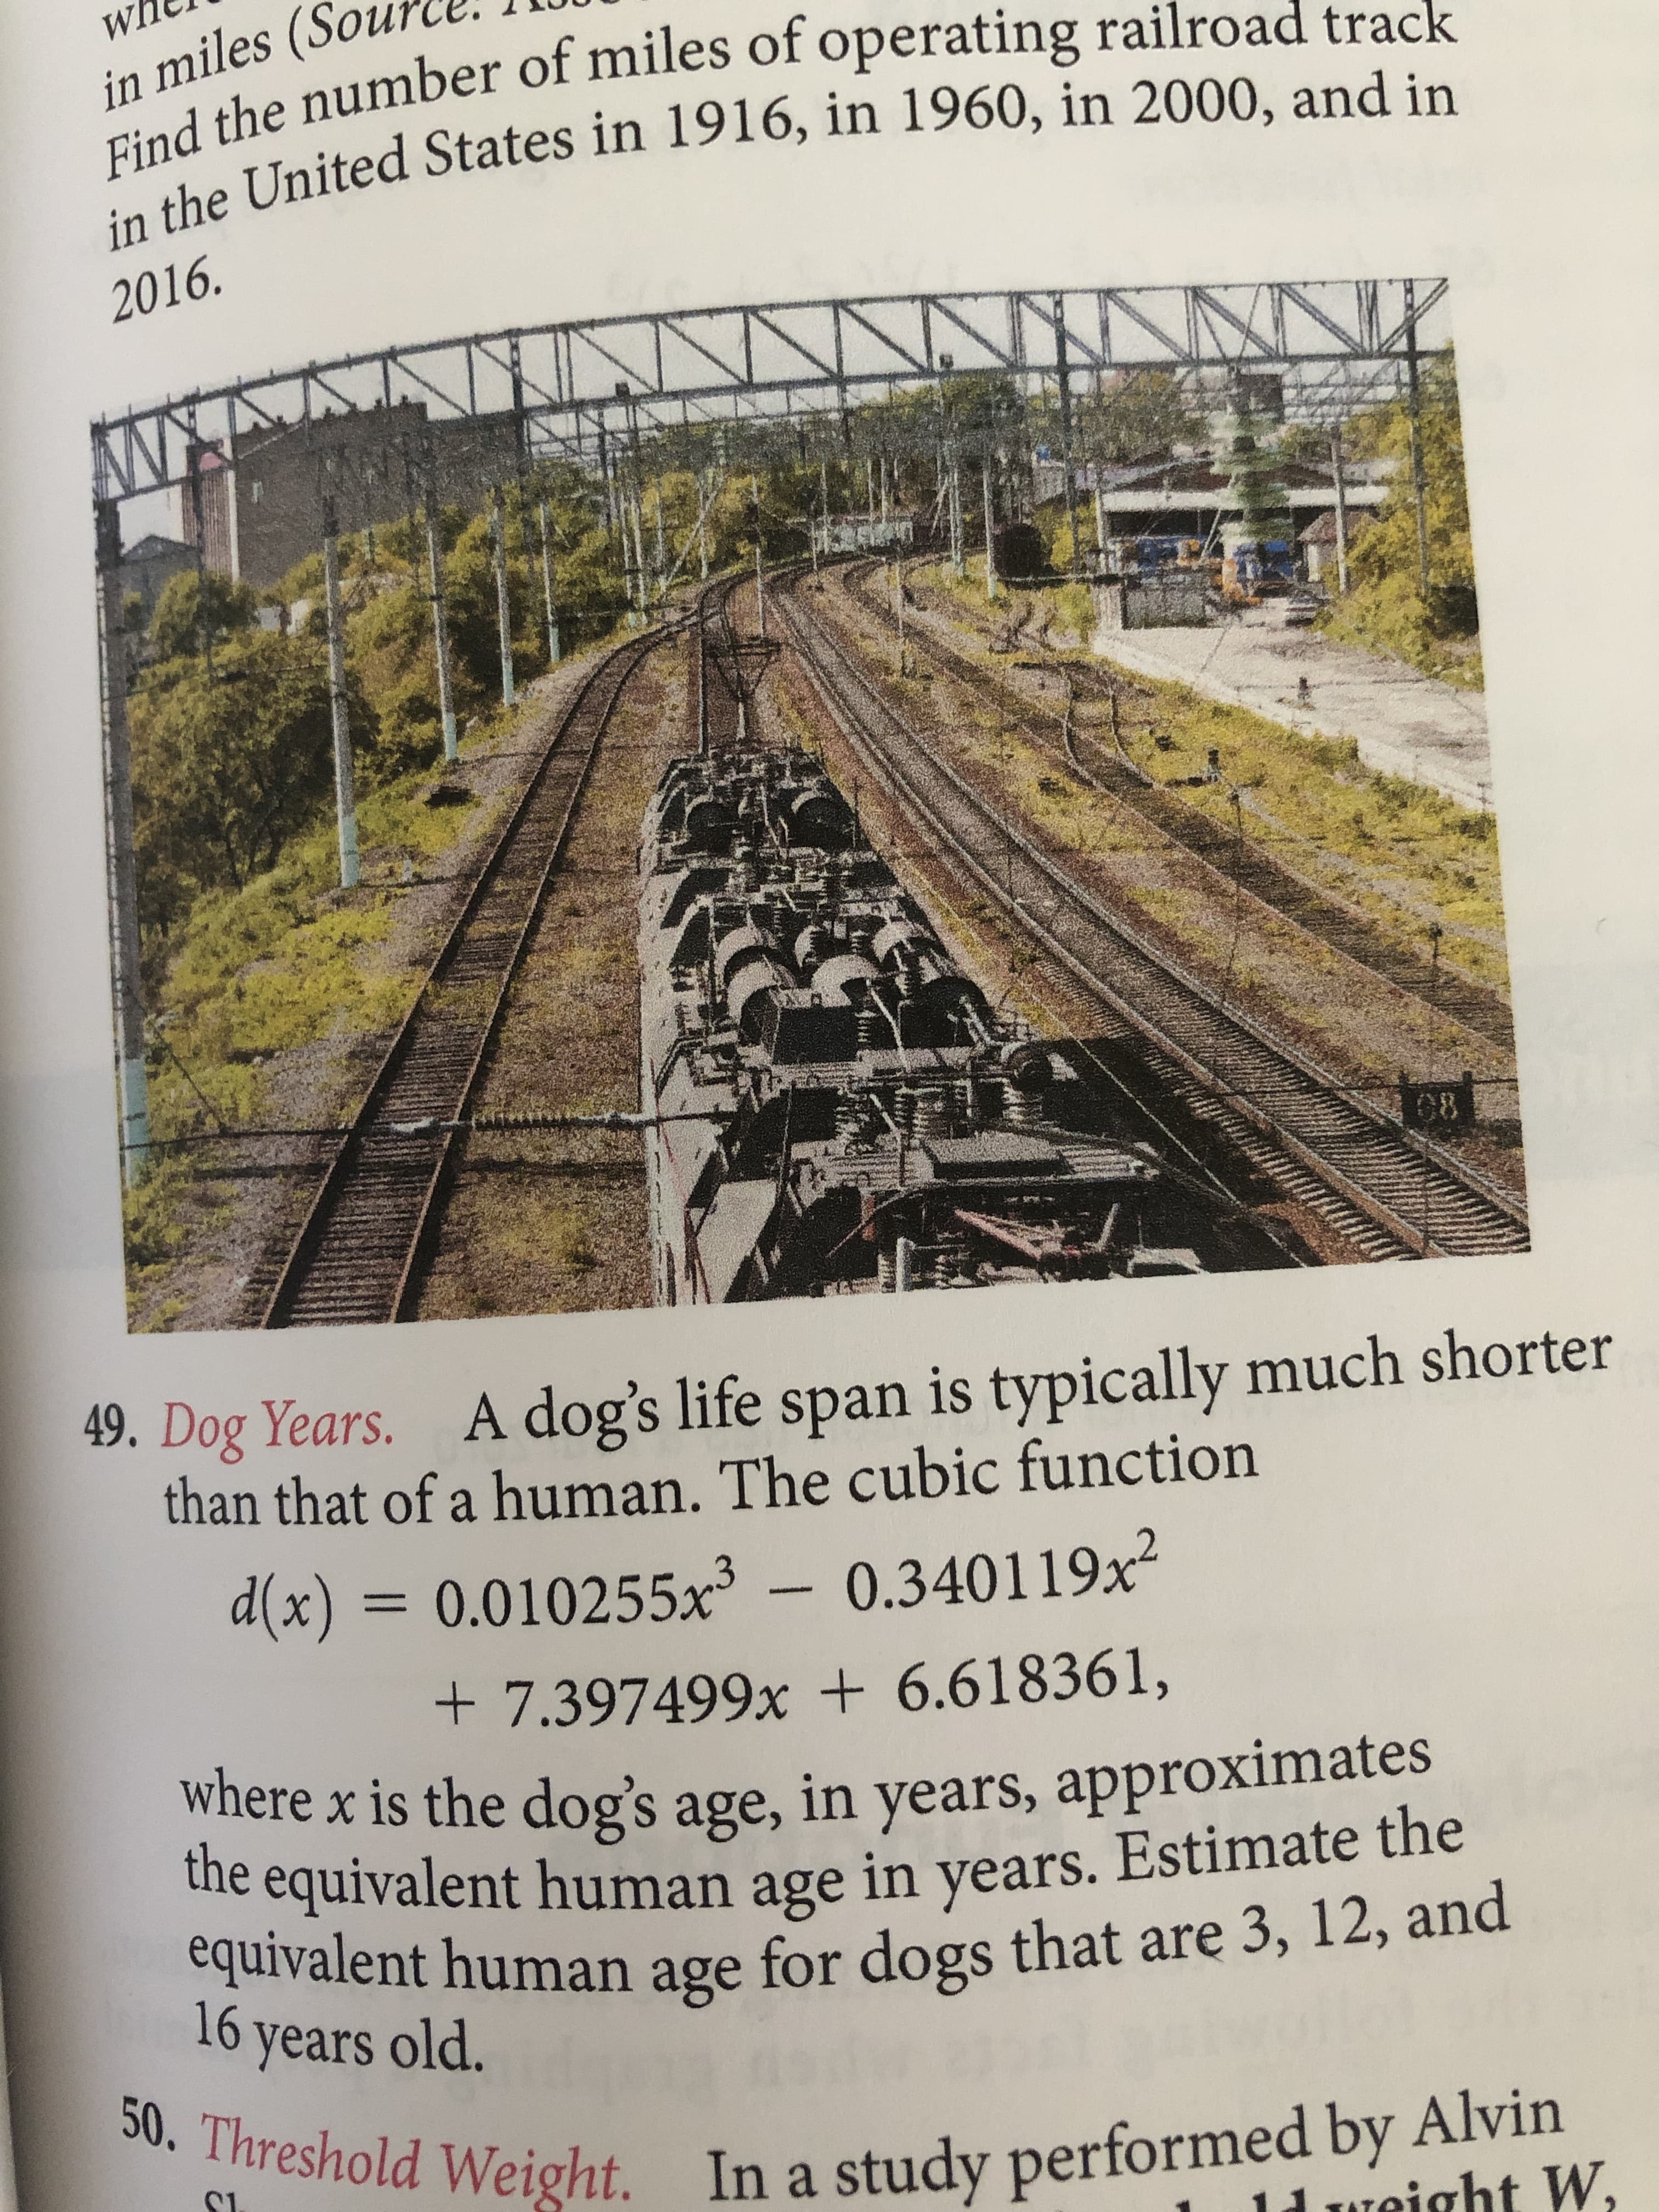 49. Dog Years. A dog's life span is typically much shorter
than that of a human. The cubic function
d(x) = 0.010255x³ – 0.340119x²
+ 7.397499x + 6.618361,
where x is the dog's age, in years, approximates
the equivalent human age in years. Estimate the
equivalent human age for dogs that are 3, 12, and
16 years old.
